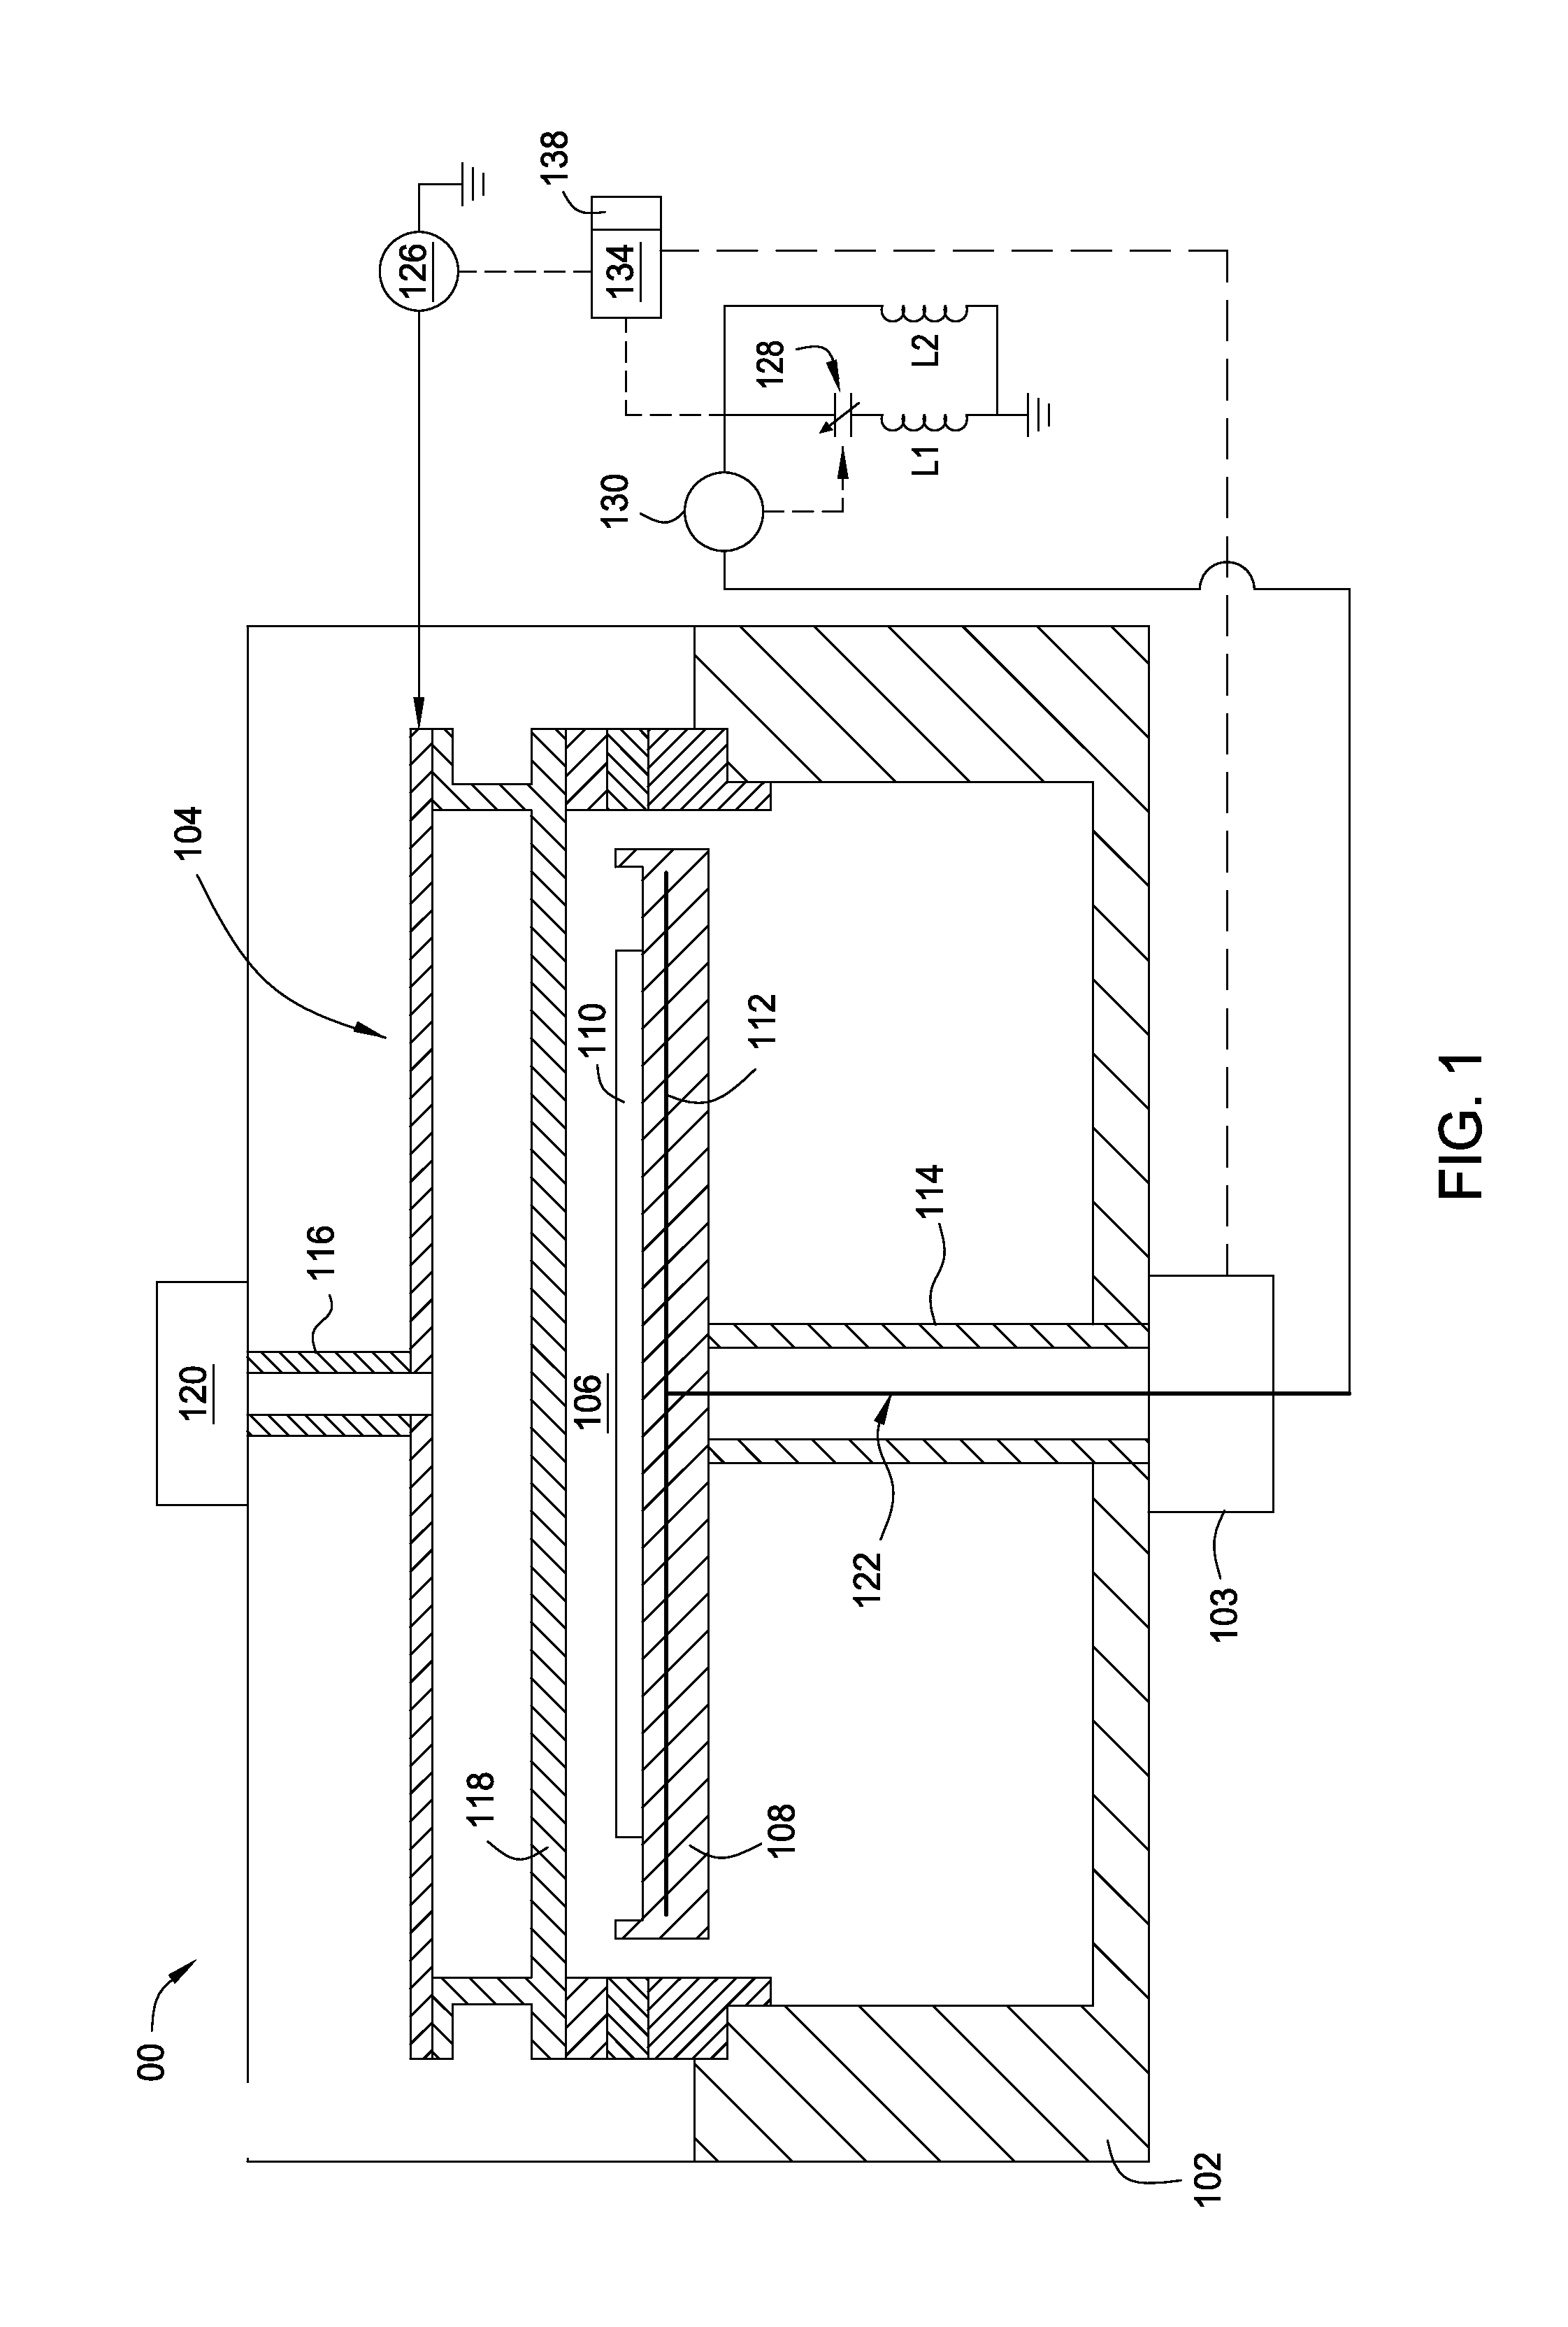 Apparatus and method for tuning a plasma profile using a tuning electrode in a processing chamber